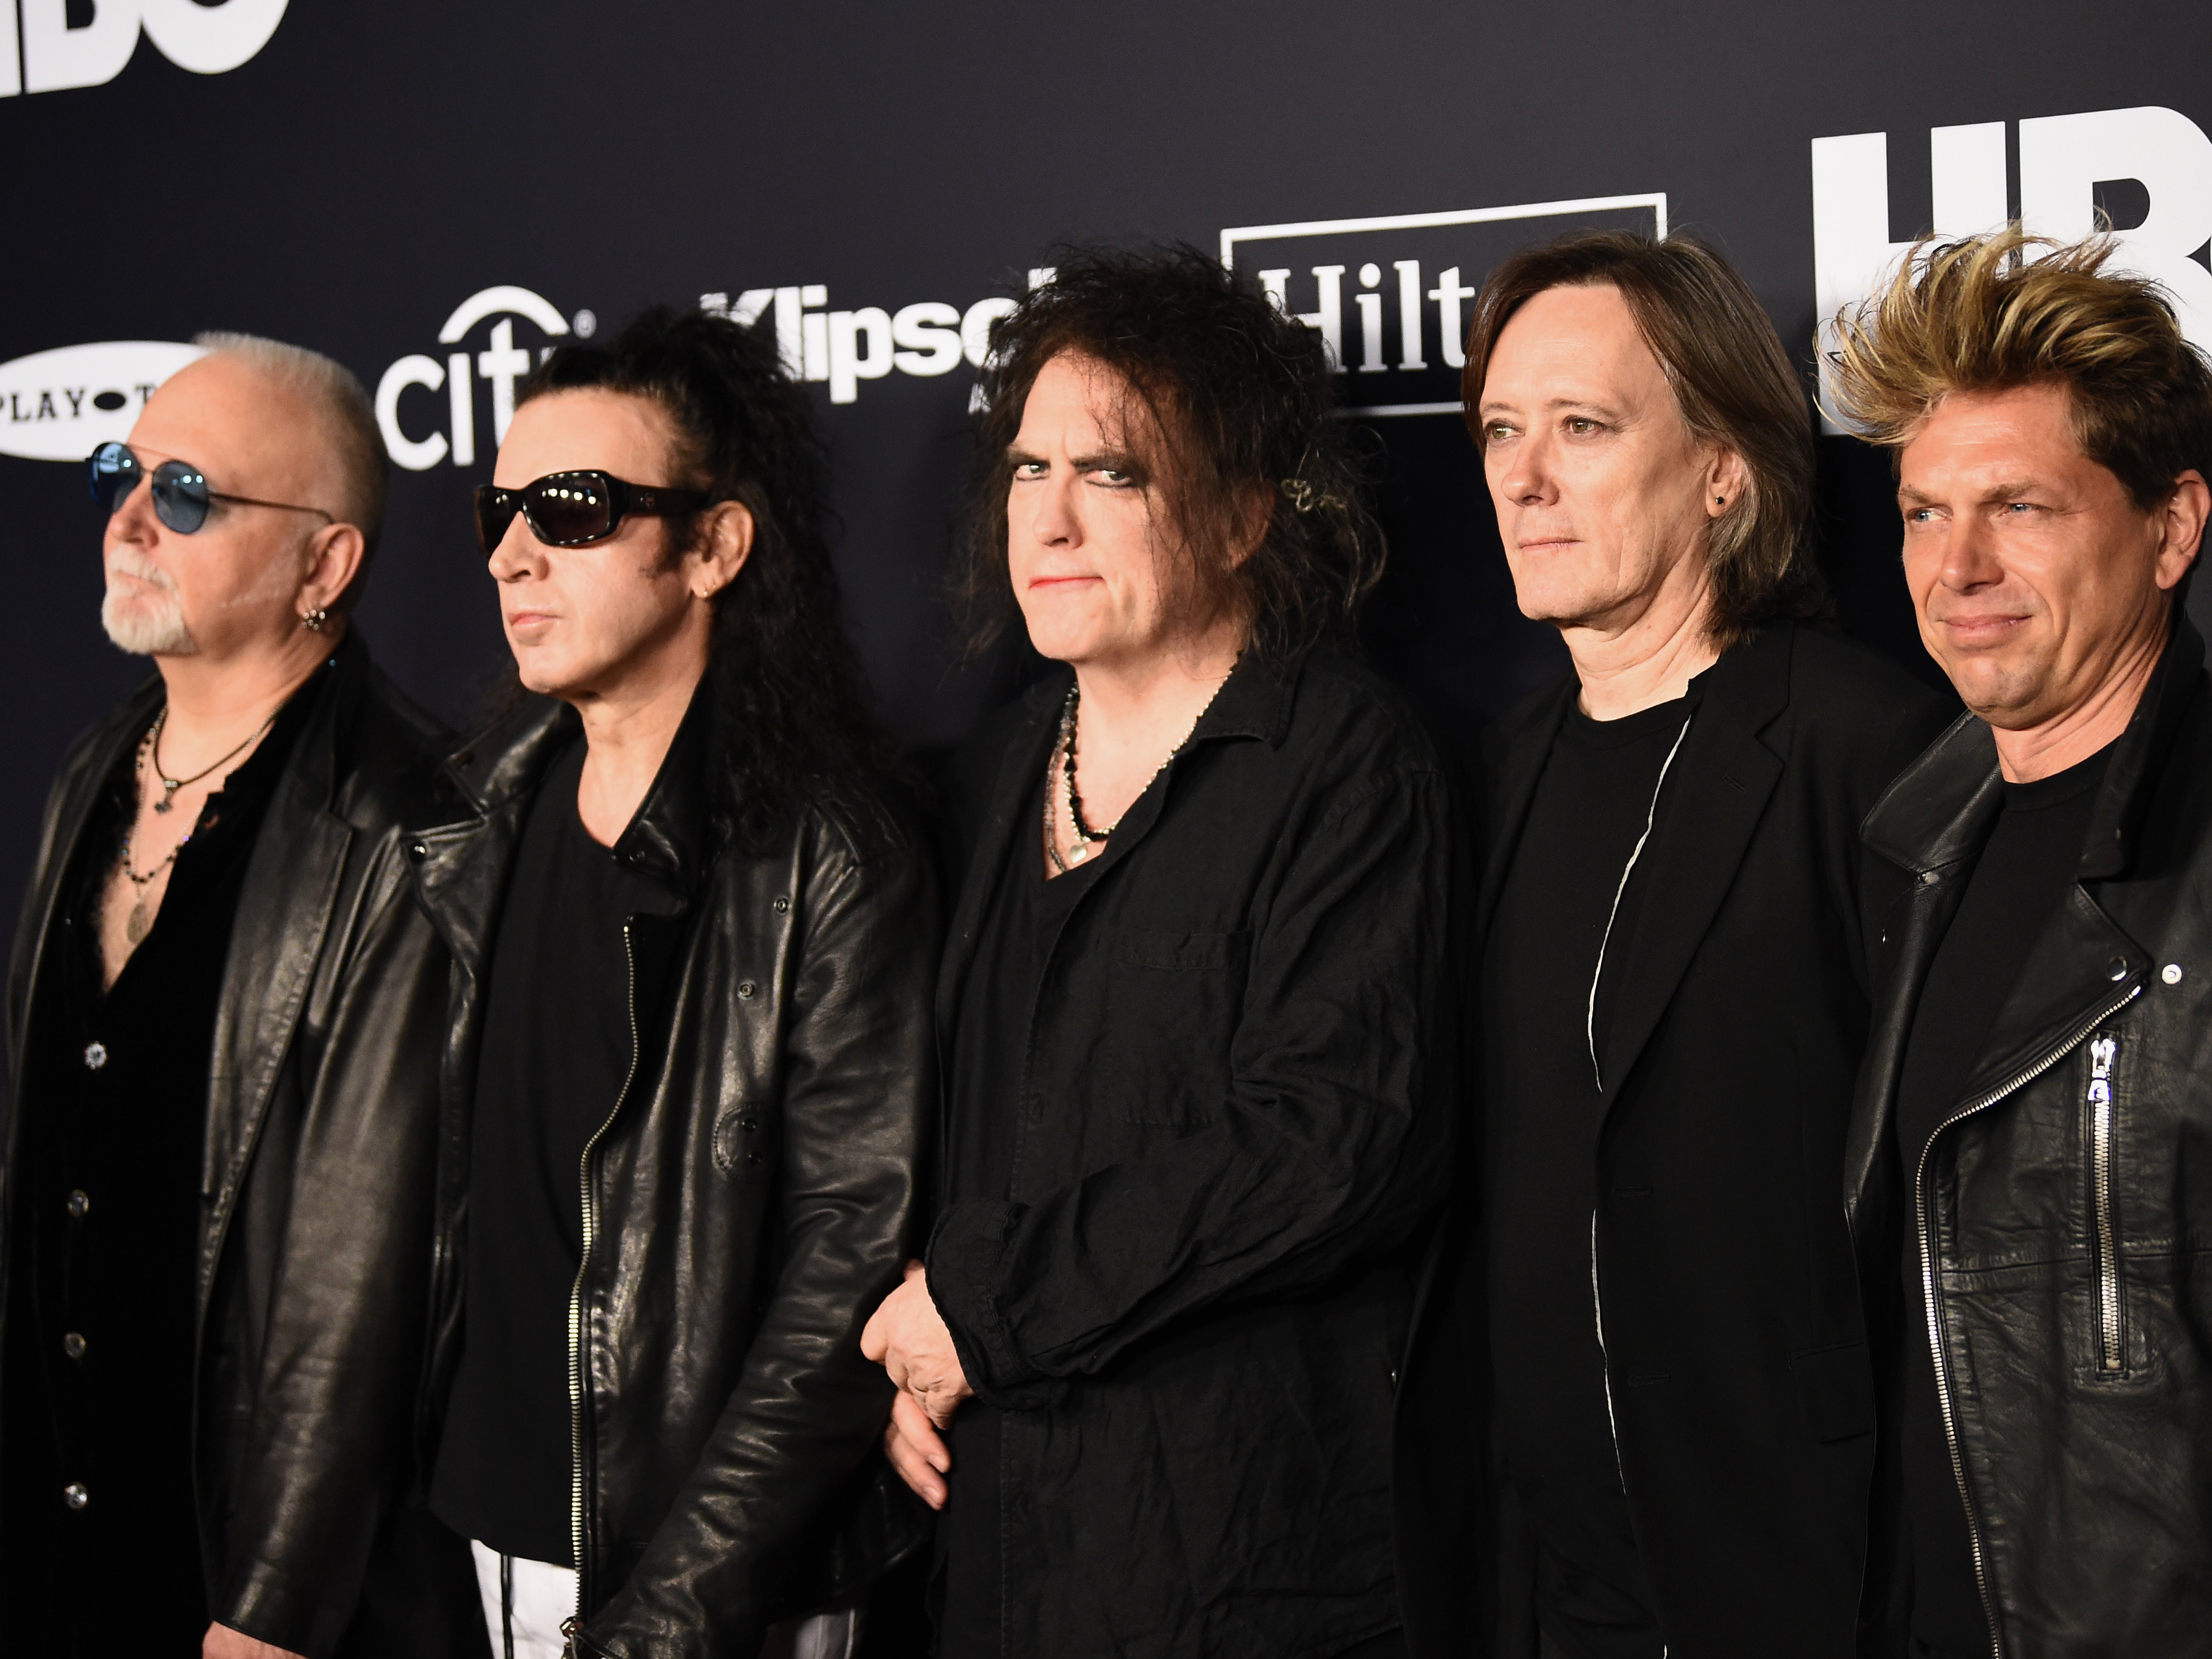 Inductees Reeves Gabrels, Simon Gallup, Robert Smith, Roger O’Donnell and Jason Cooper of The Cure attend the 2019 Rock & Roll Hall Of Fame Induction Ceremony at Barclays Center in 2019